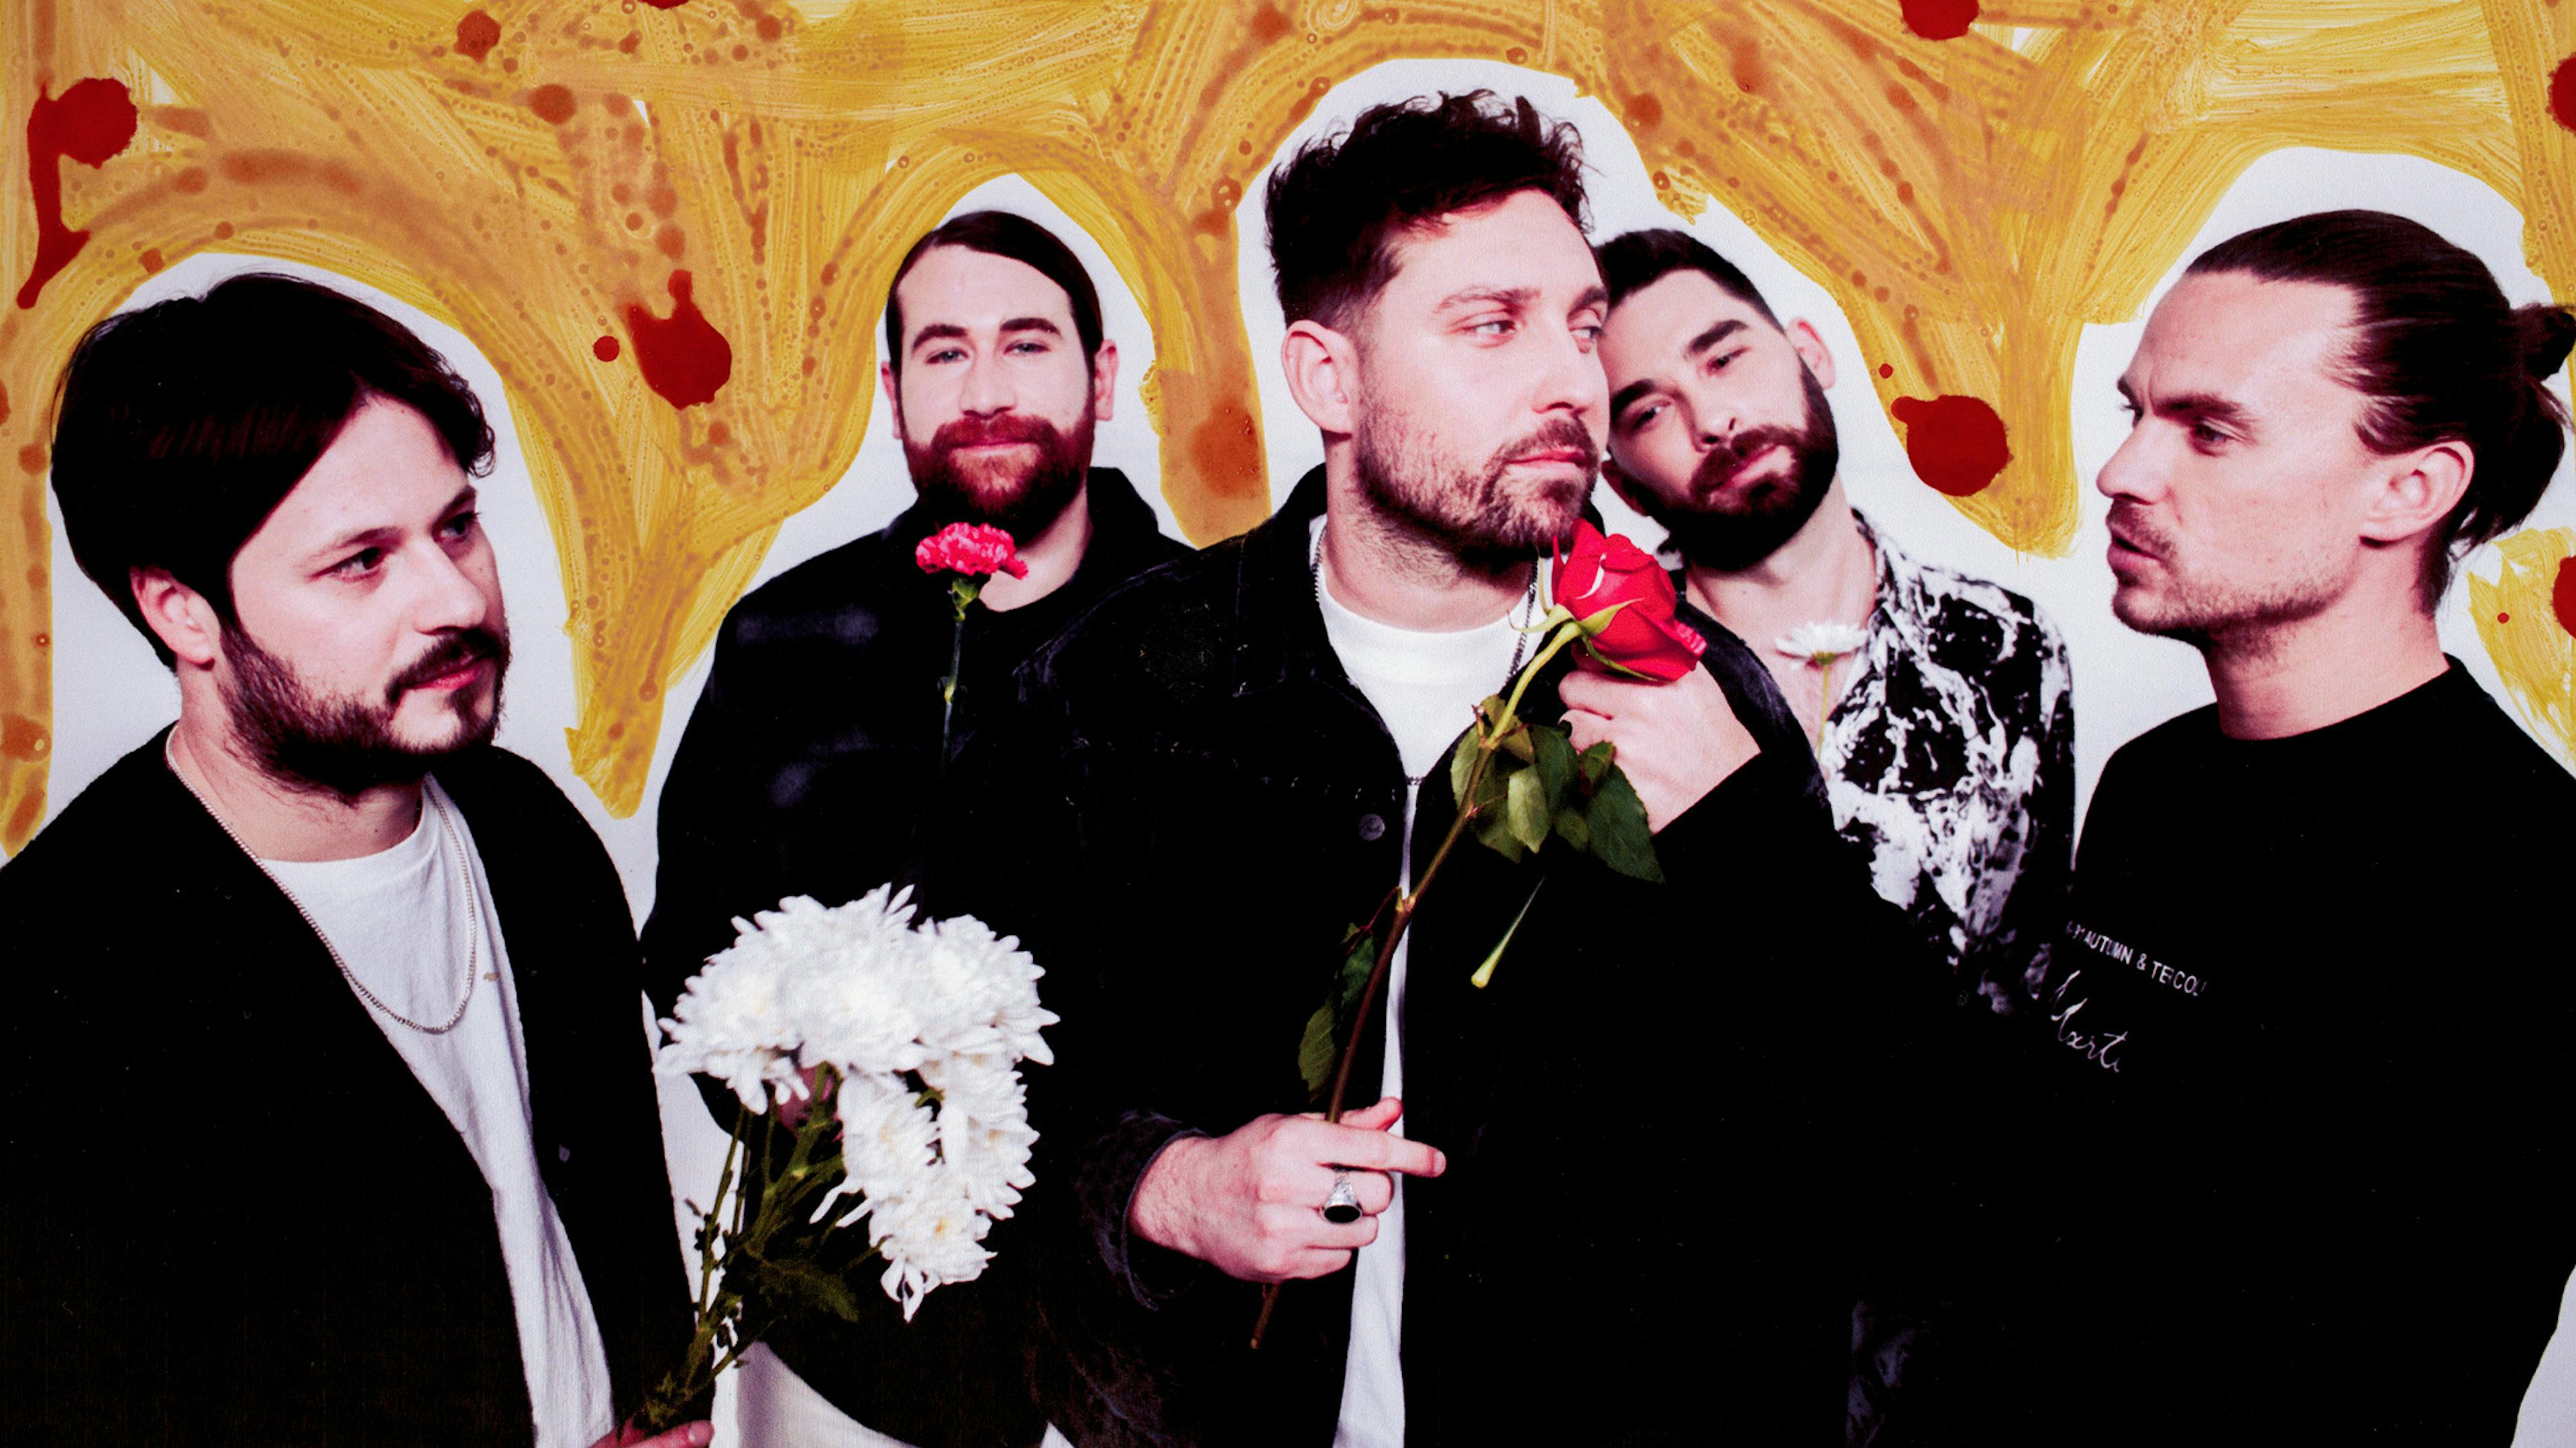 You Me At Six: “Showing pain doesn’t make you weak. You’re just human”